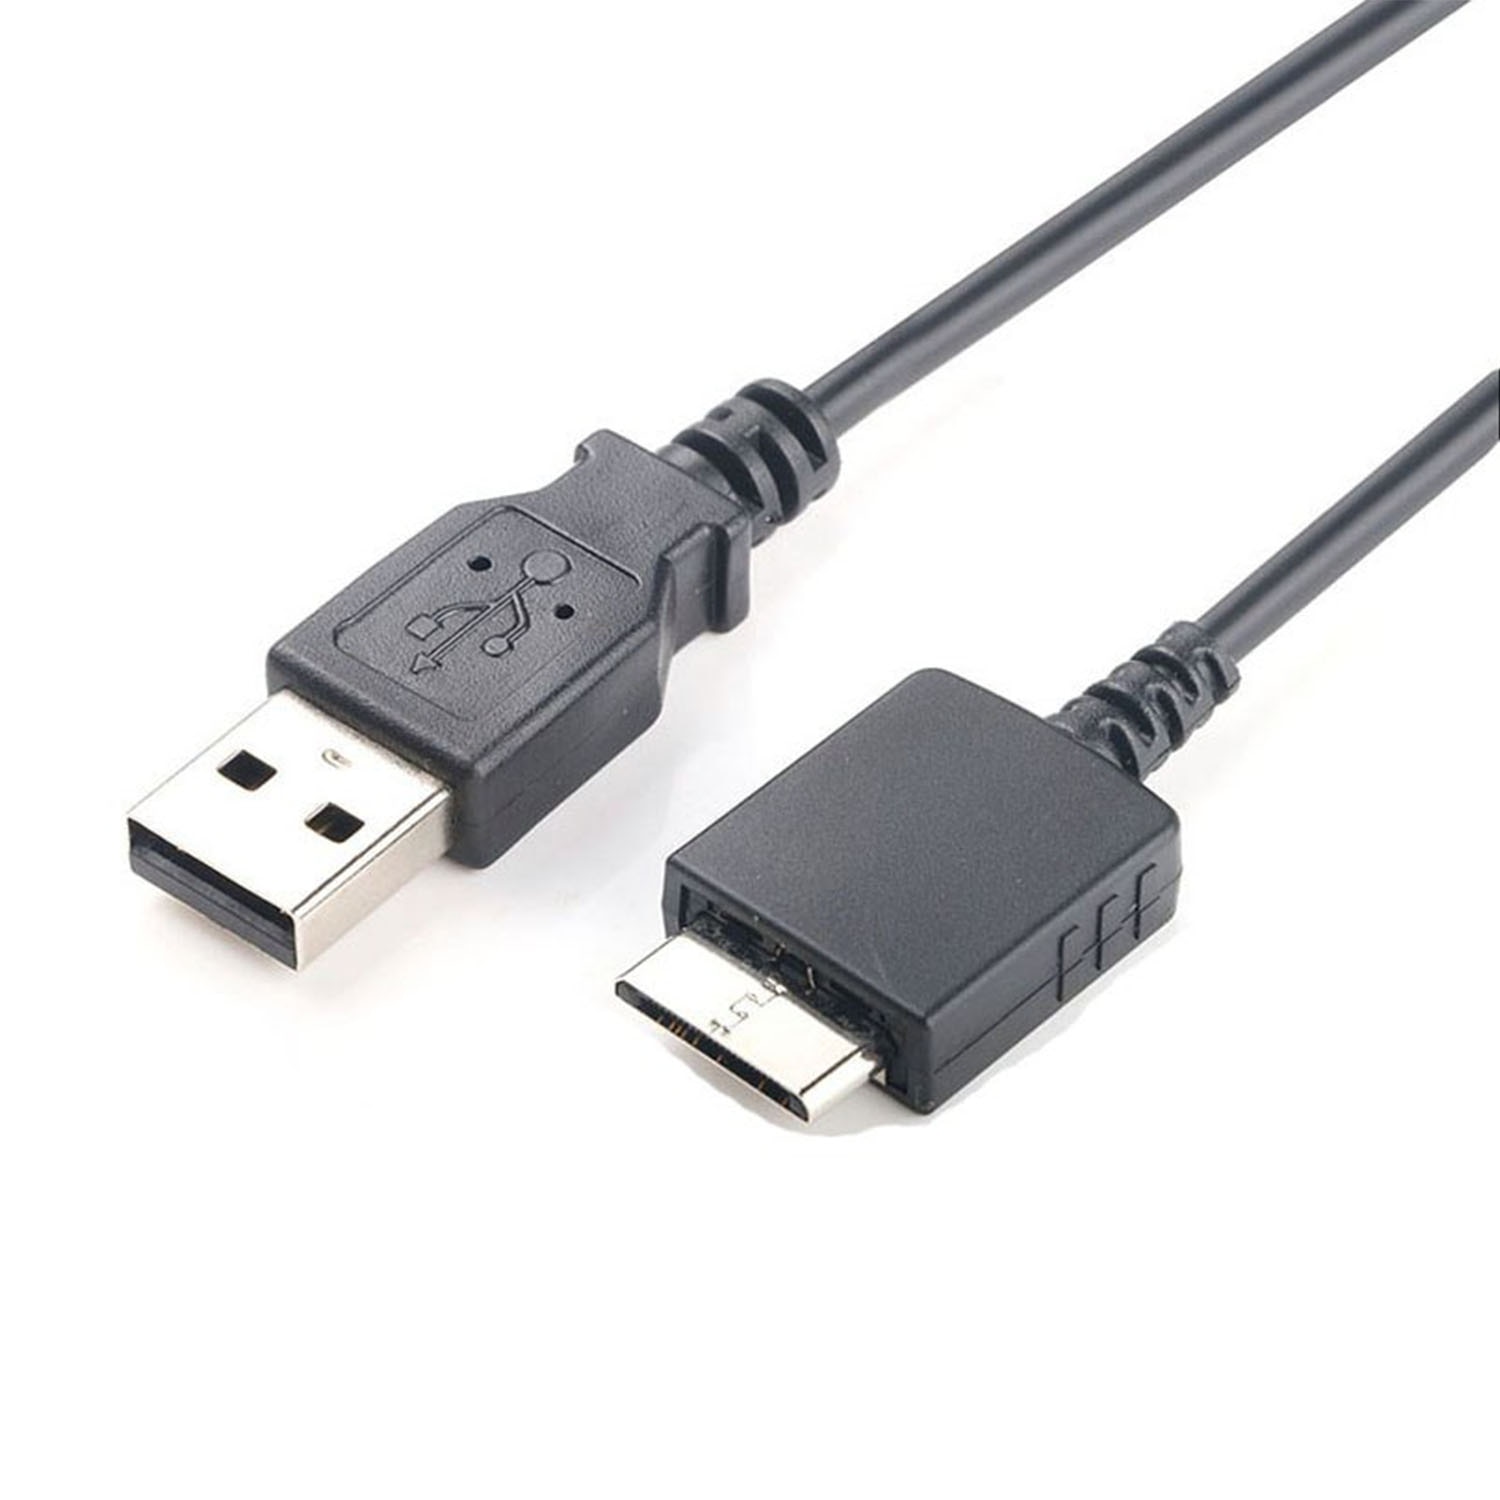 Usb Charger Cable Data Sync Voor Sony Walkman MP3 Speler Nwz A916 A918 A919 A919 NWZ-A10 NWZ-A15 NWZ-A17 NWZ-A25